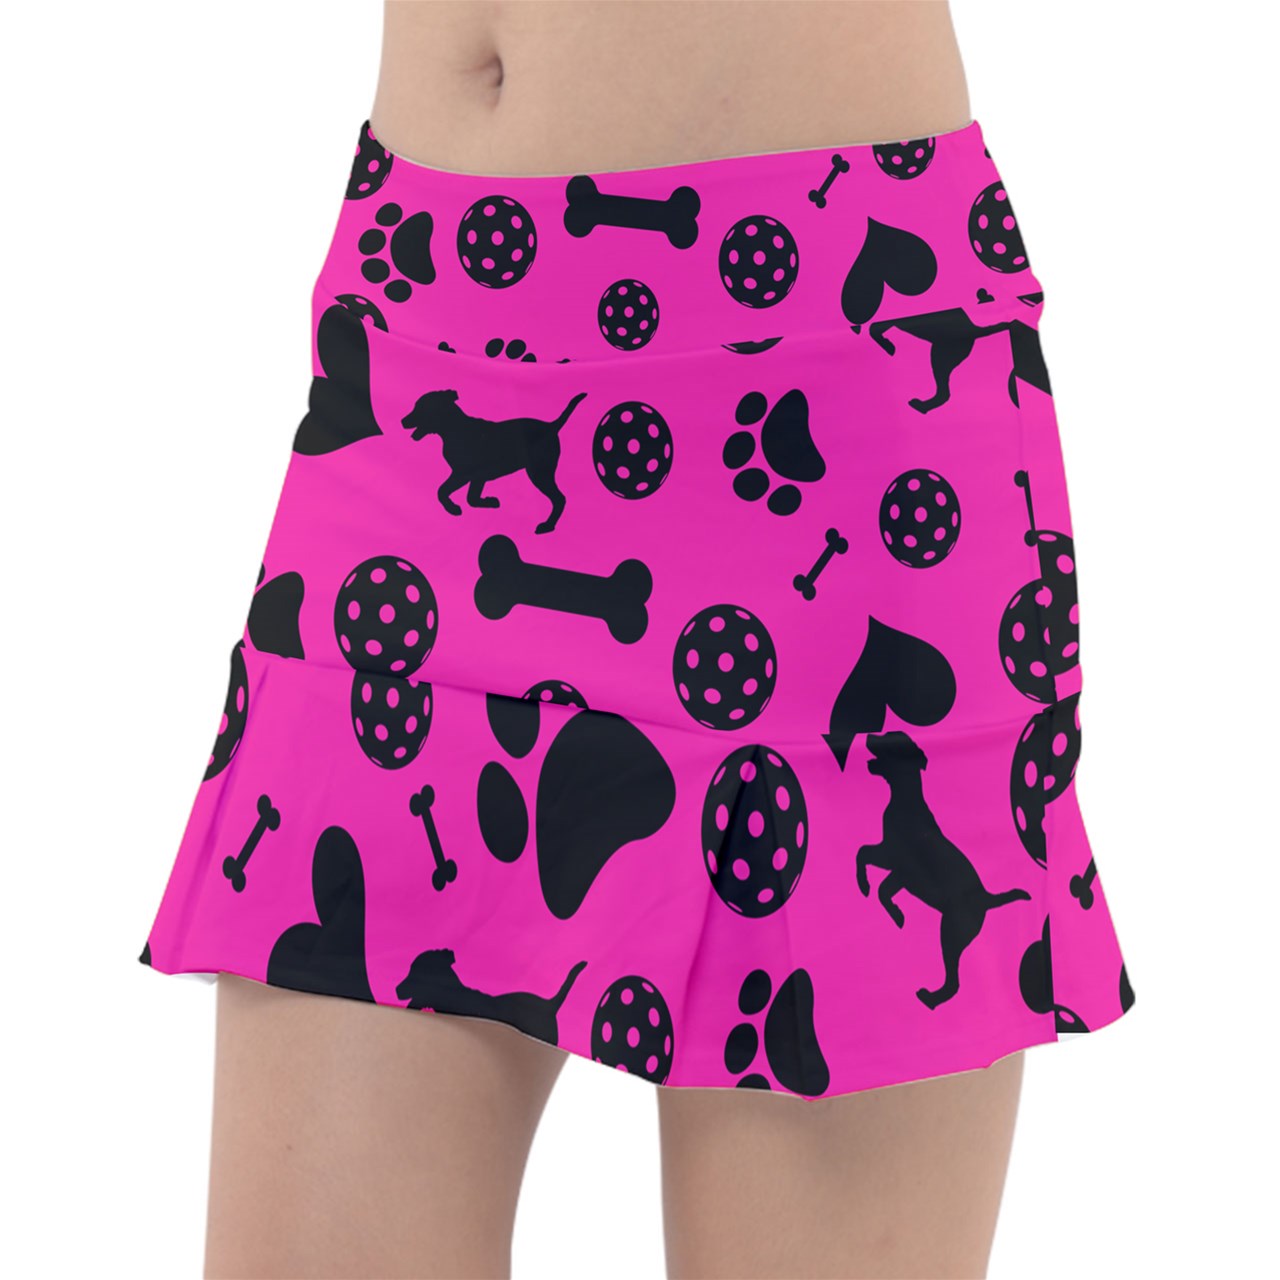 Dizzy Pickle Millie Women's Pickleball Classic Pleated Skort Coordinating Patterned Inner Shorts Pockets Pink